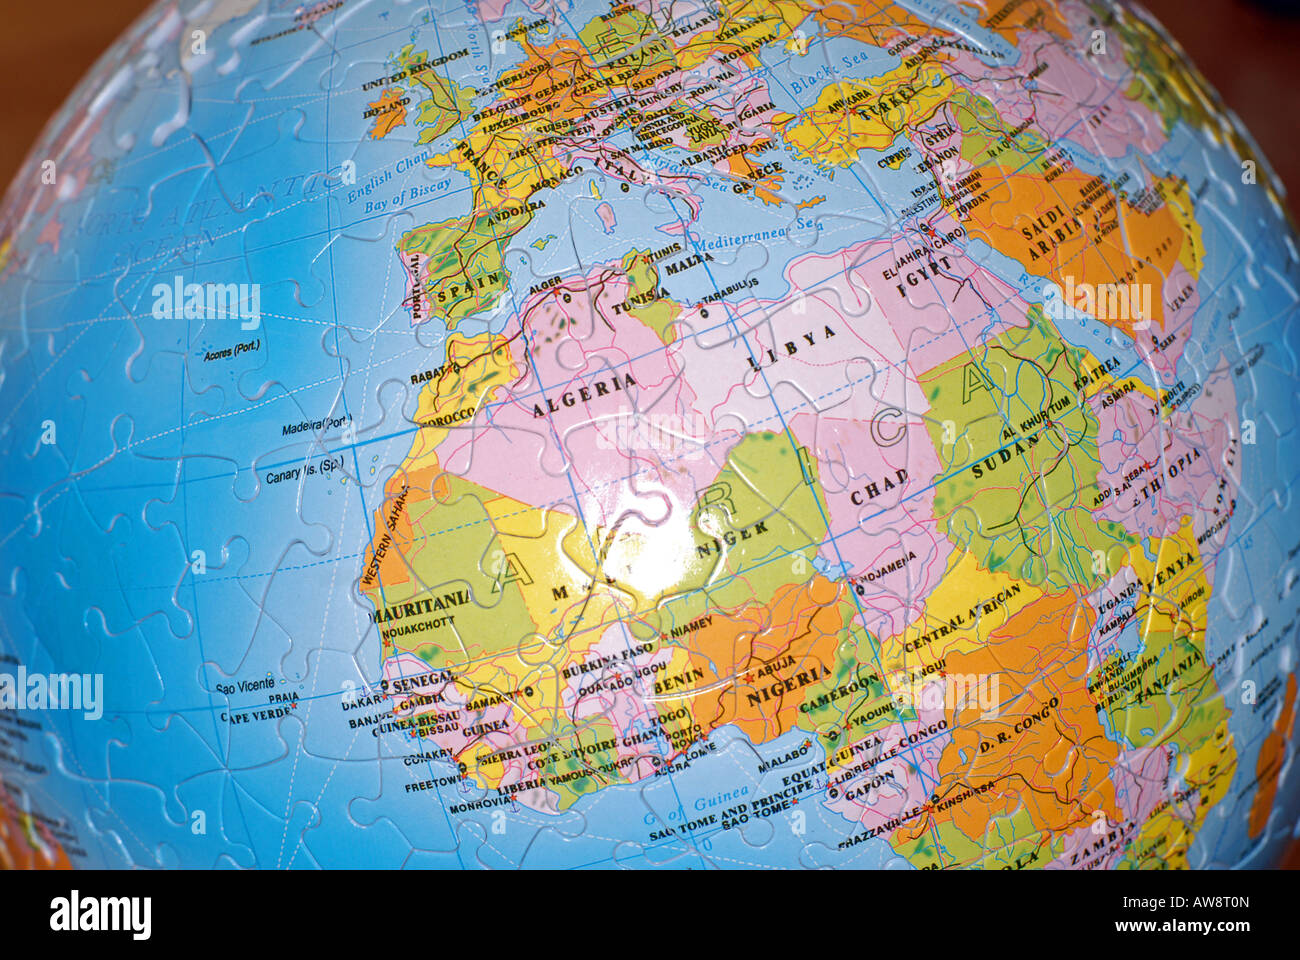 A globe of the world showing Stock Photo